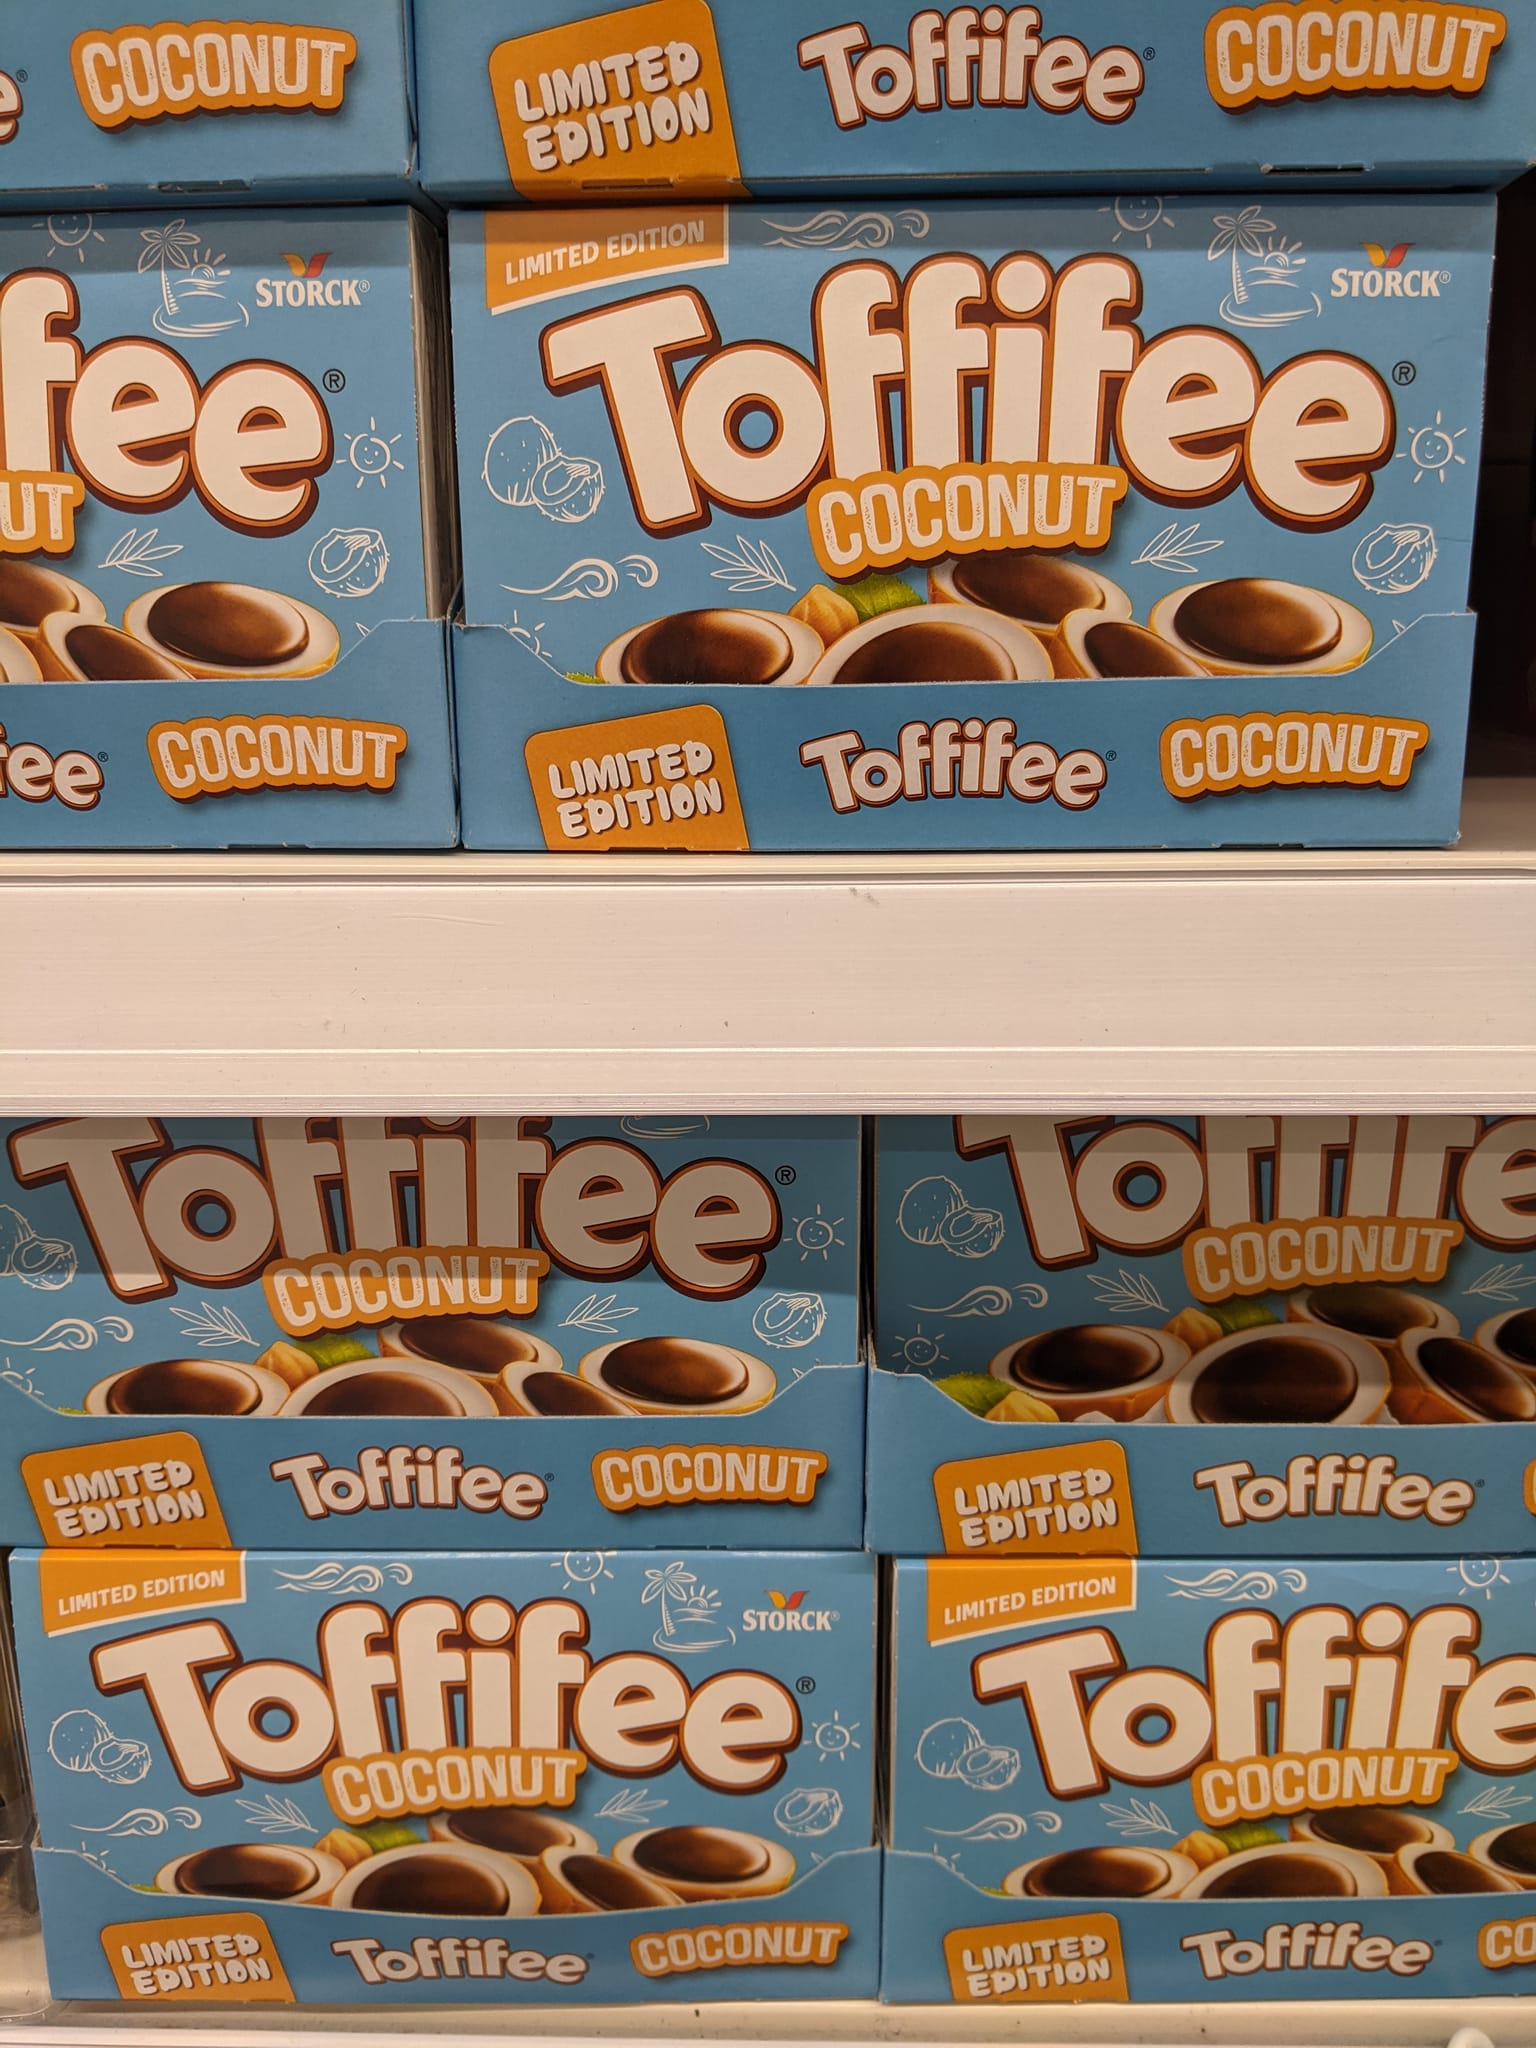 Shoppers are going wild over the coconut-flavoured Toffifee